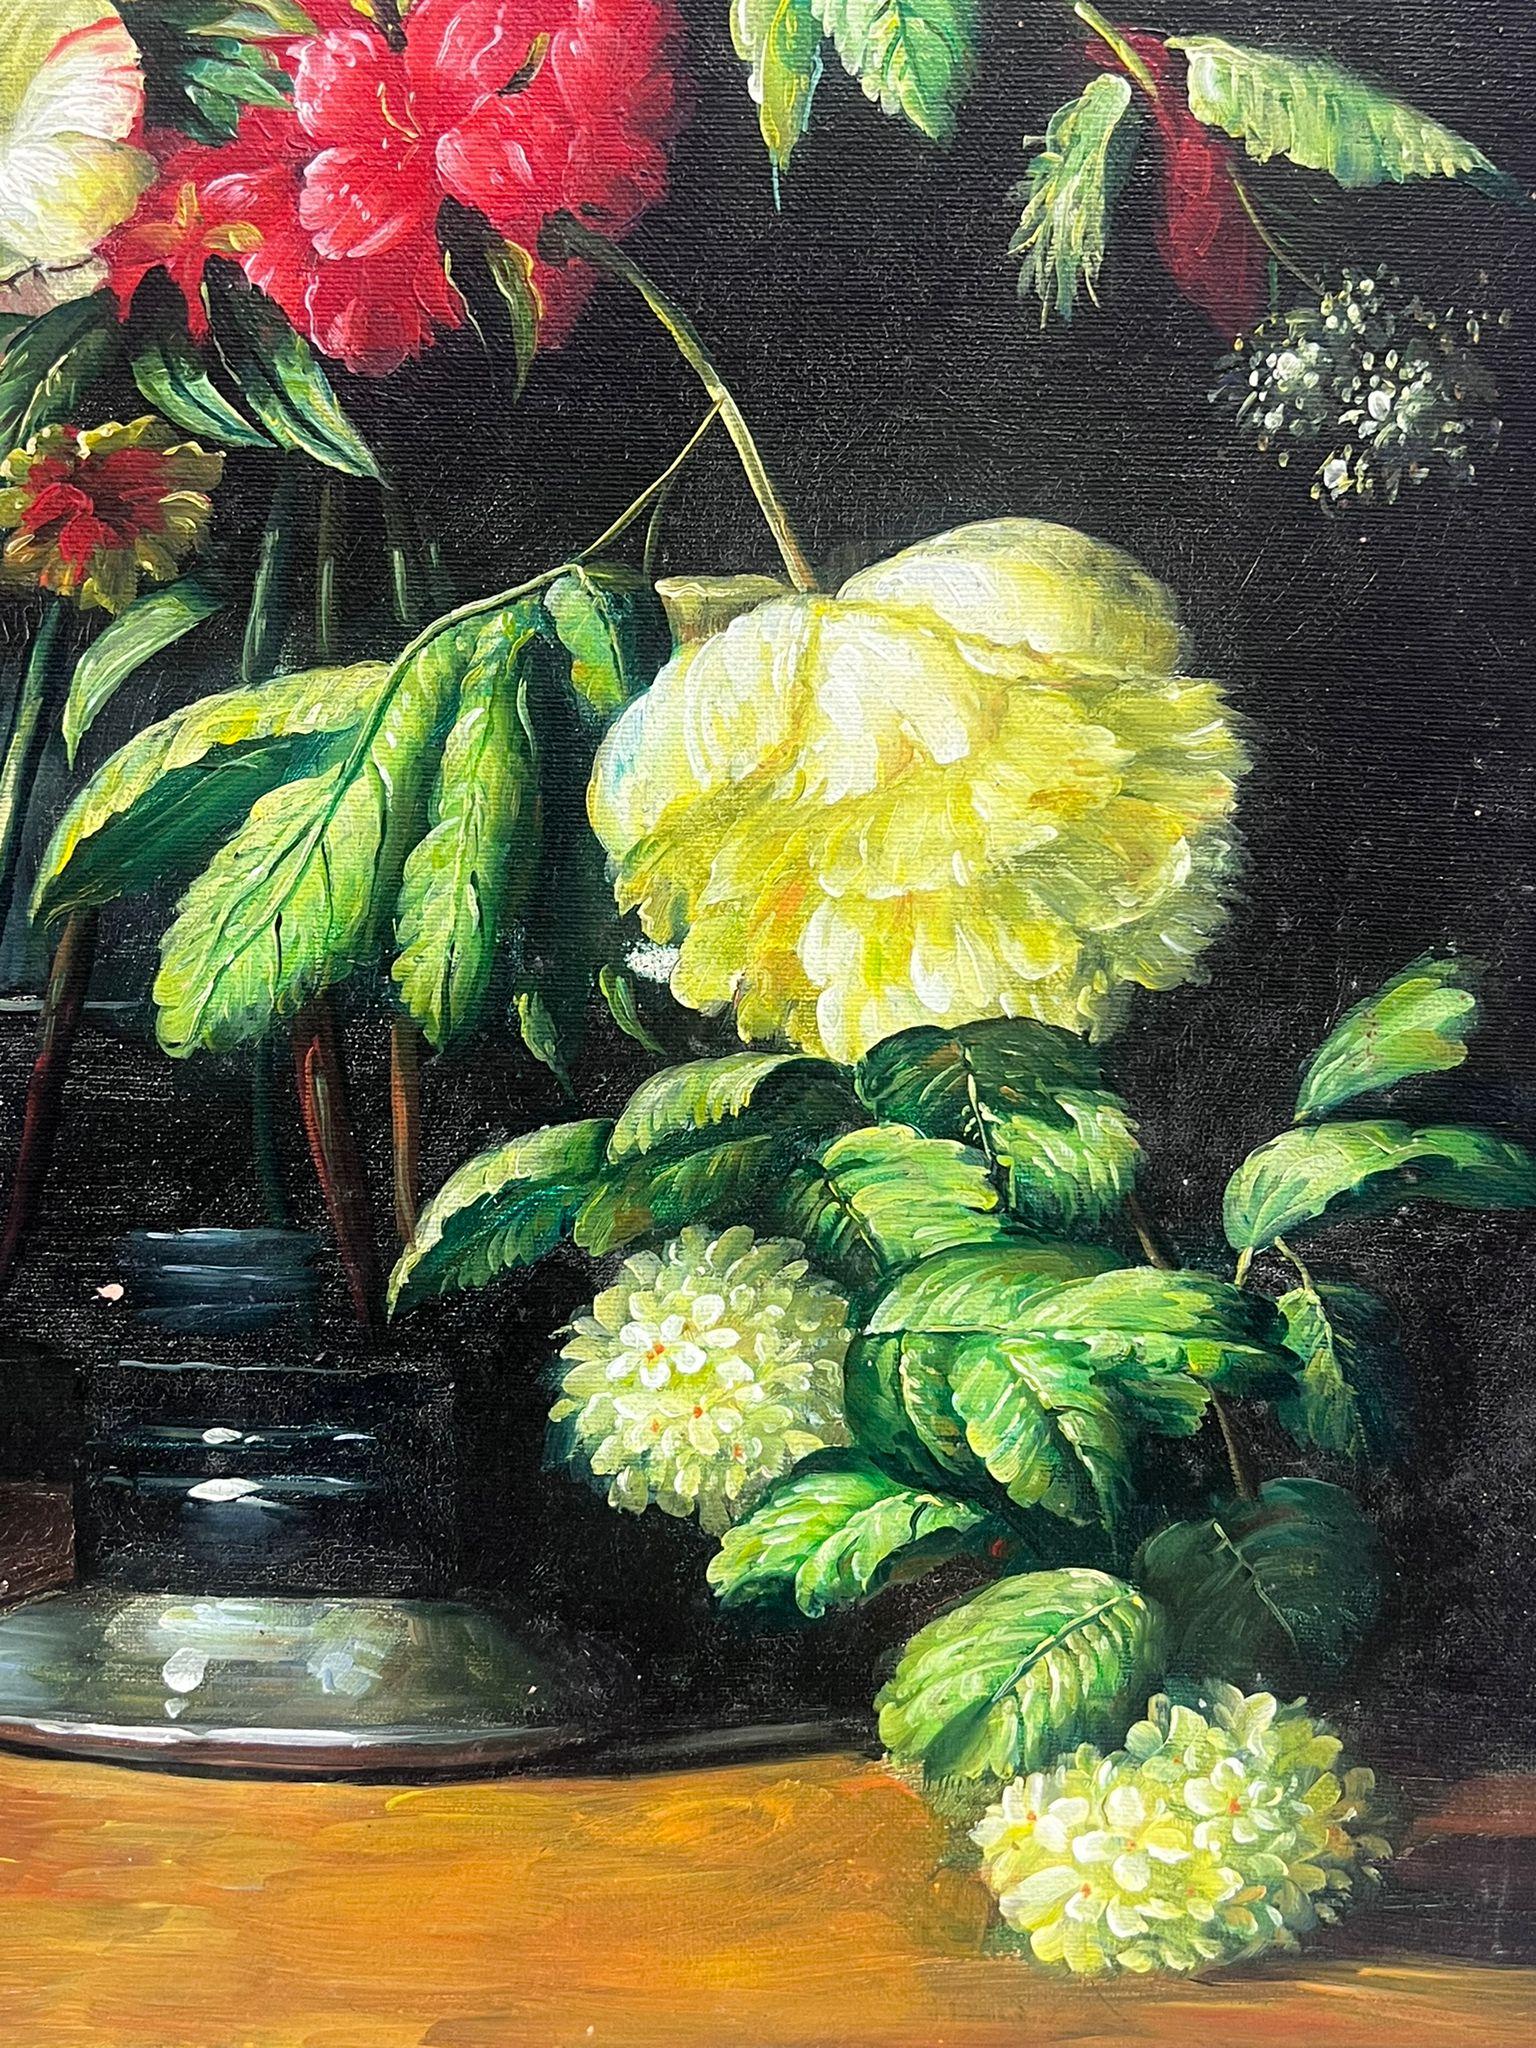 Profusion of Flowers
European artist, late 20th century
oil on canvas, unframed
canvas : 24 x 20 inches
provenance: private collection, UK
condition: very good and sound condition 